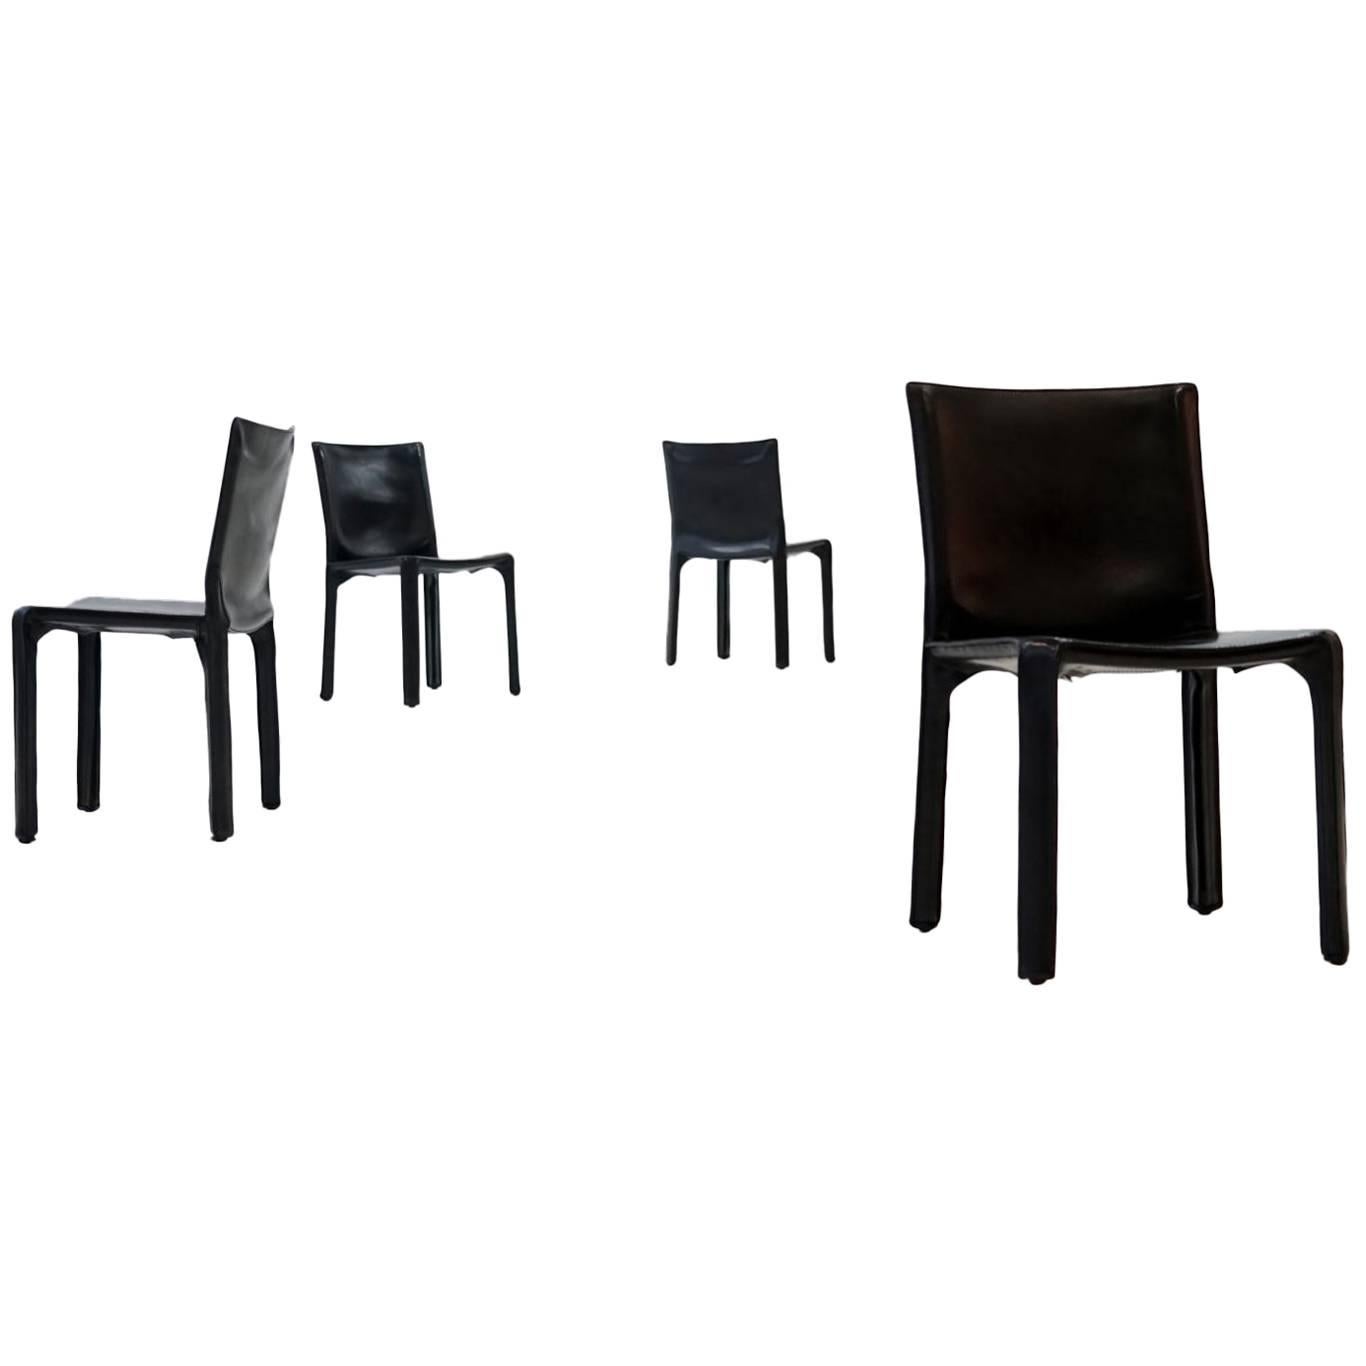 Set of Four Leather Chair 412 CAB Chairs by Mario Bellini for Cassina